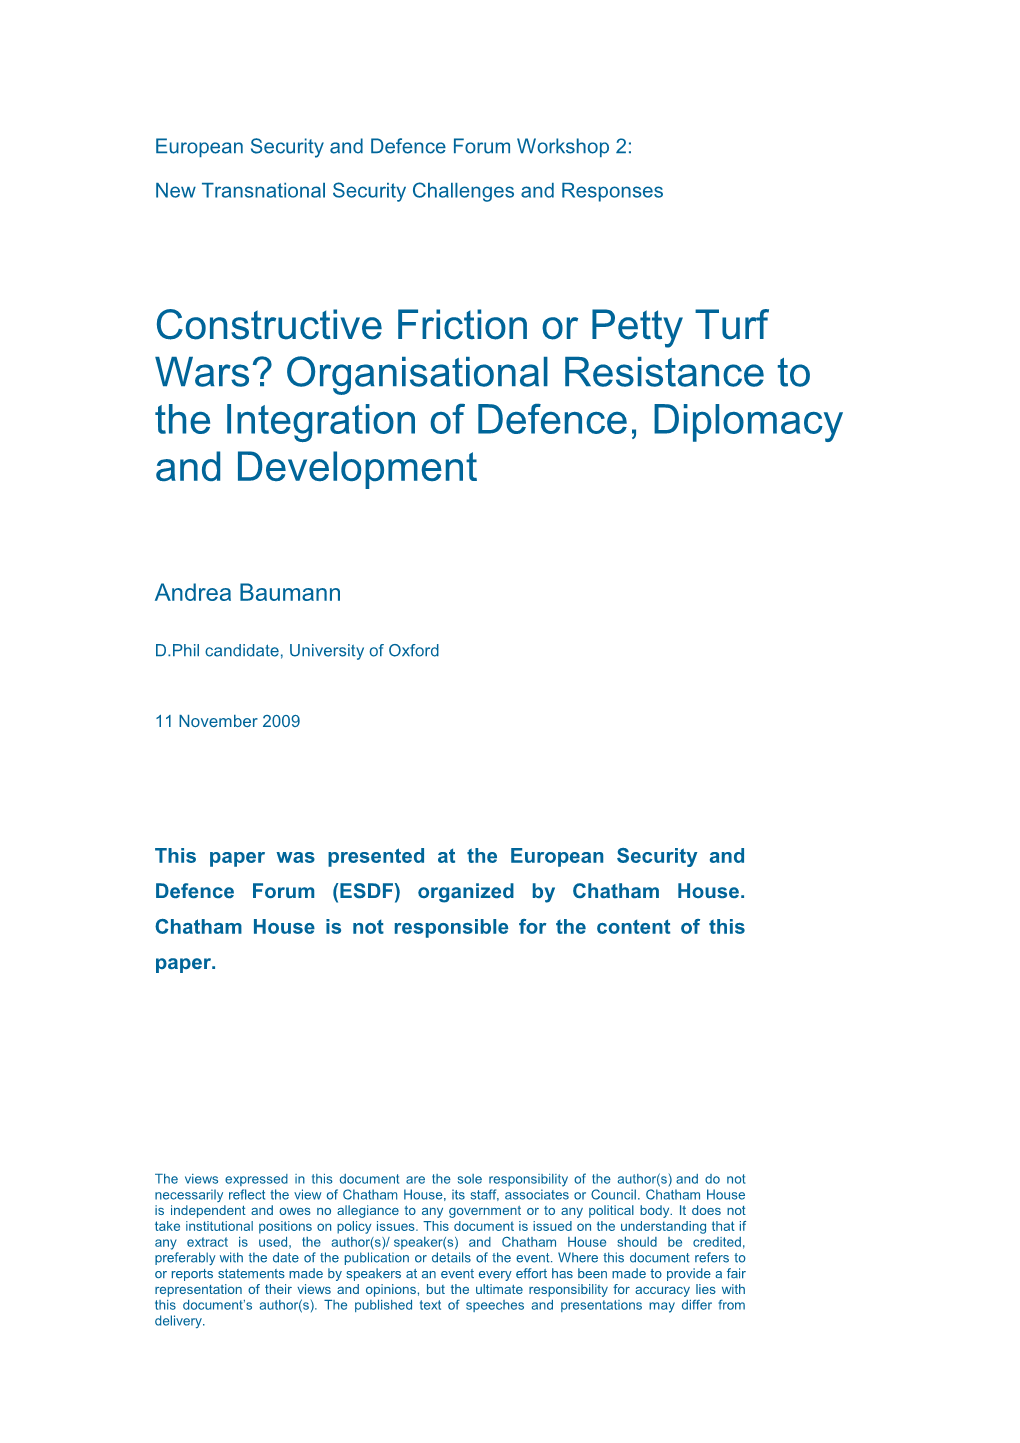 Constructive Friction Or Petty Turf Wars? Organisational Resistance to the Integration of Defence, Diplomacy and Development